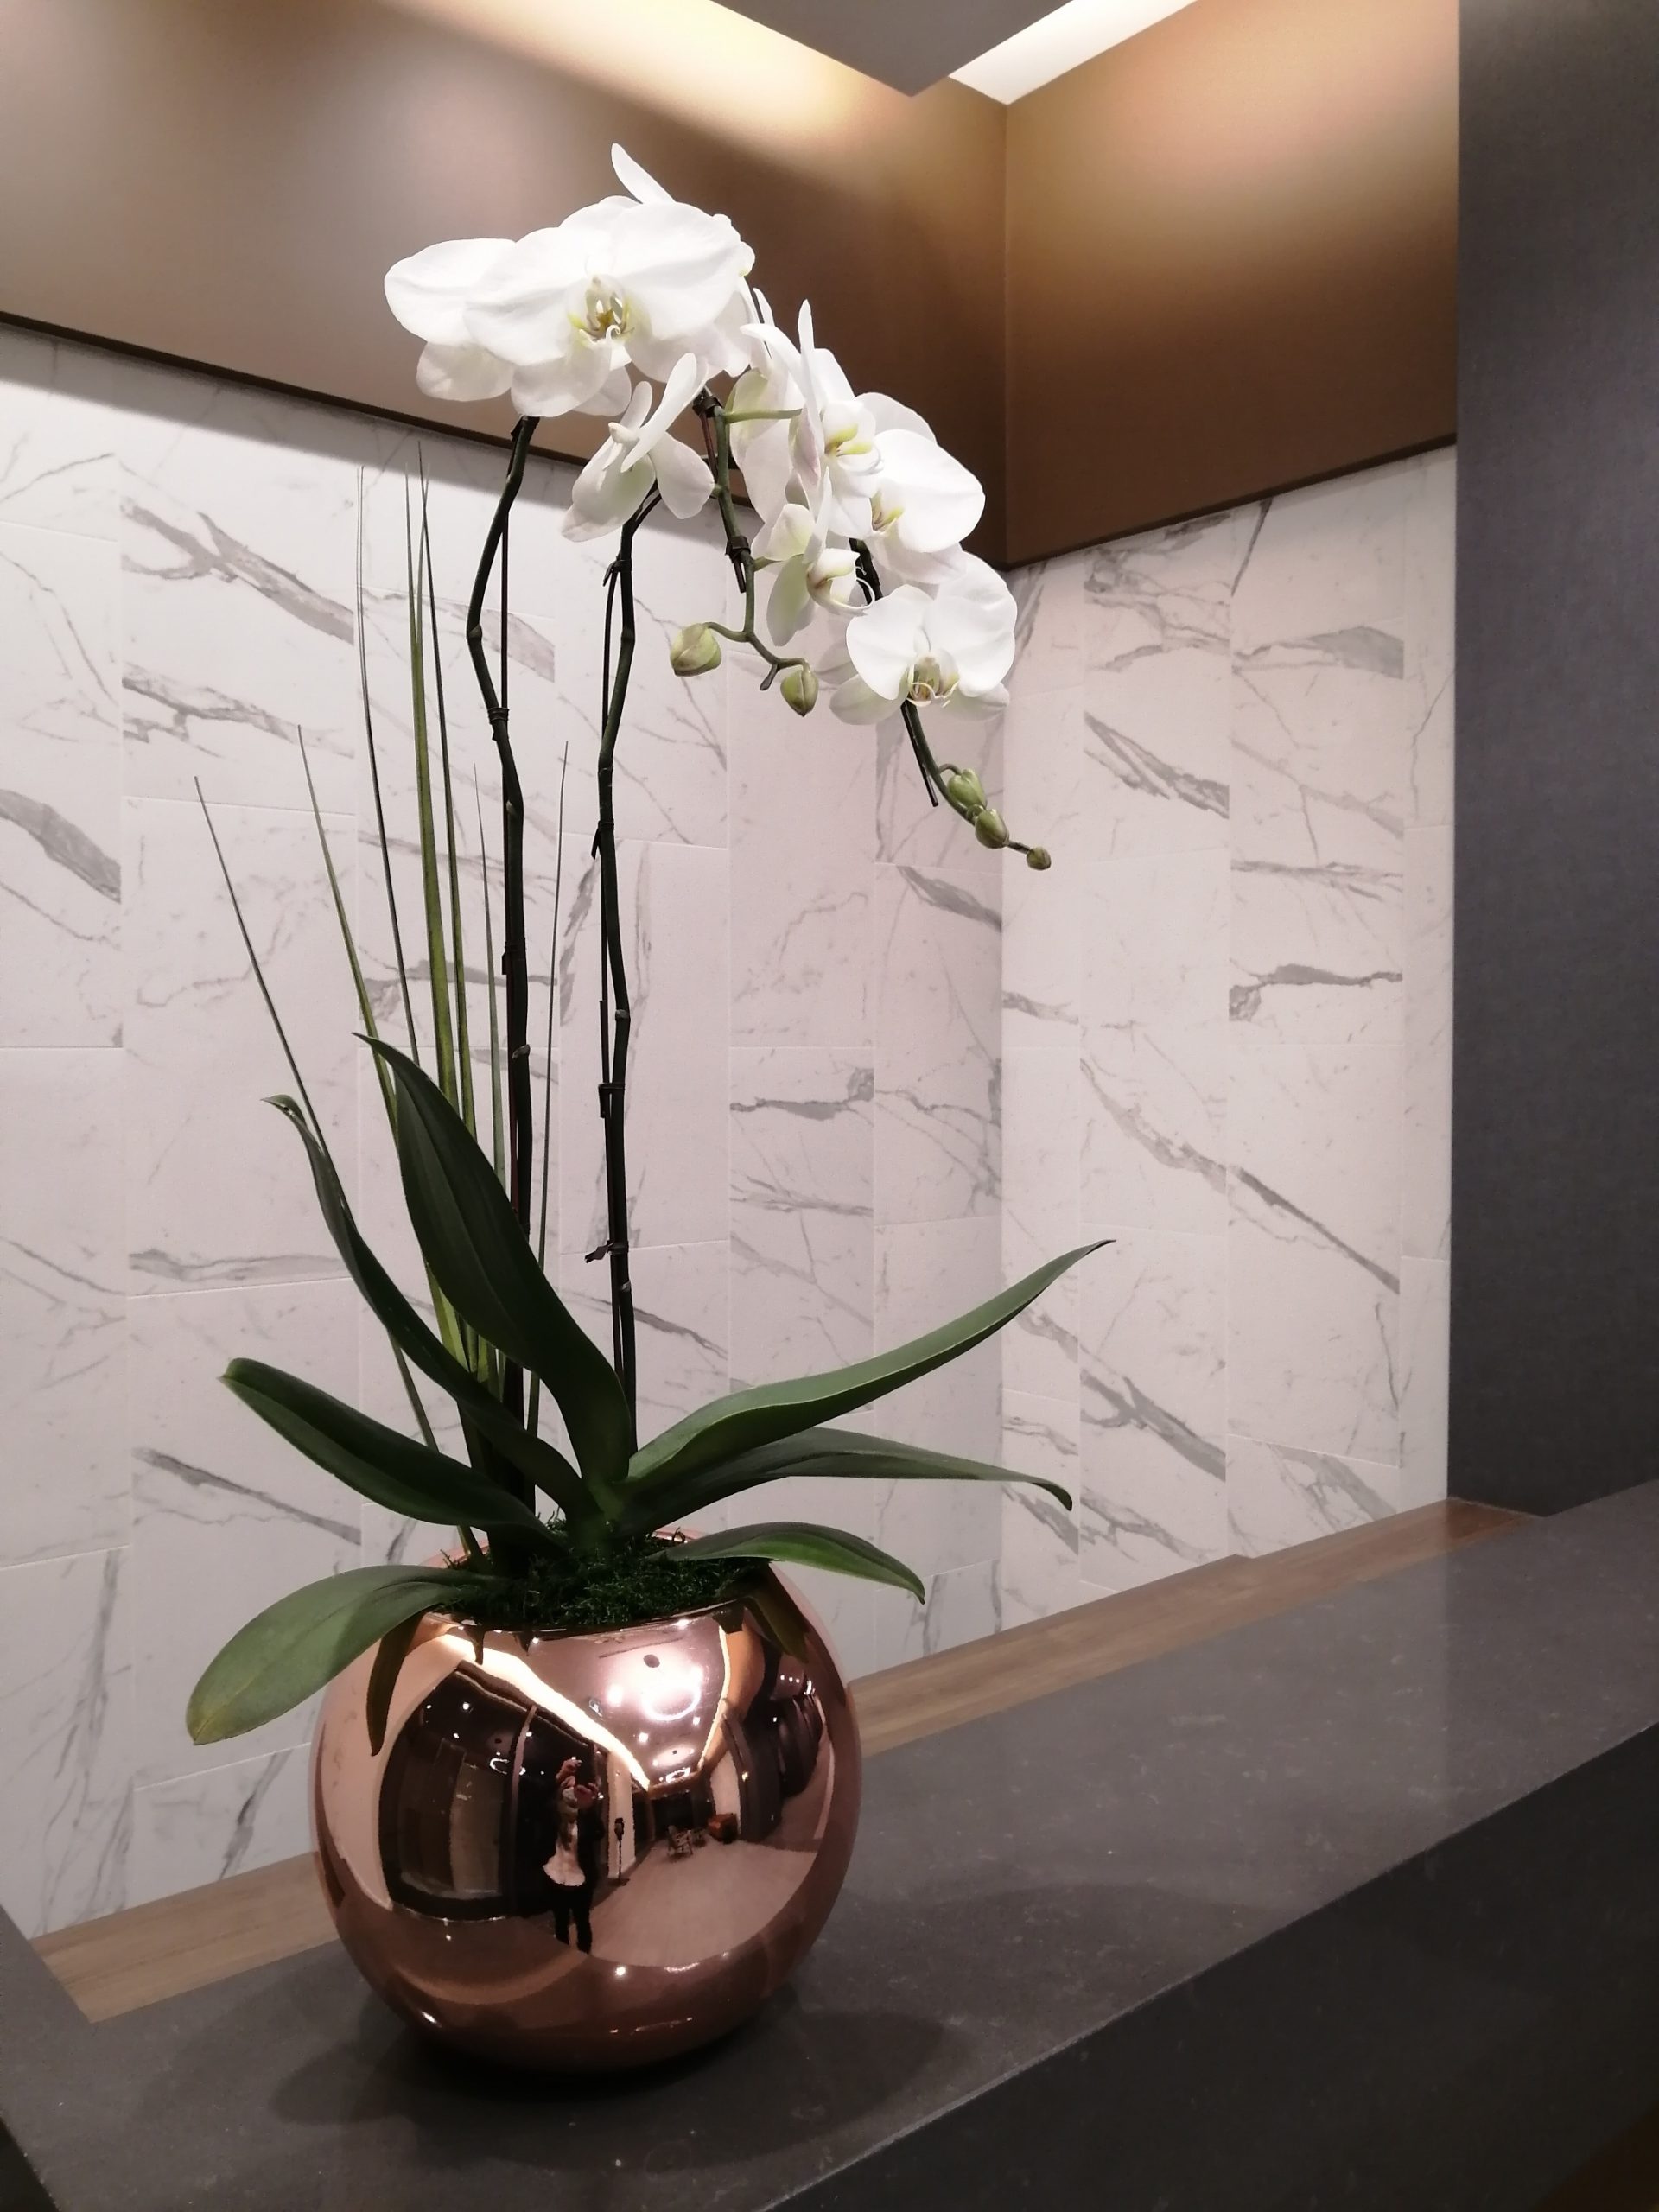 Metalic bowl with tall white orchids